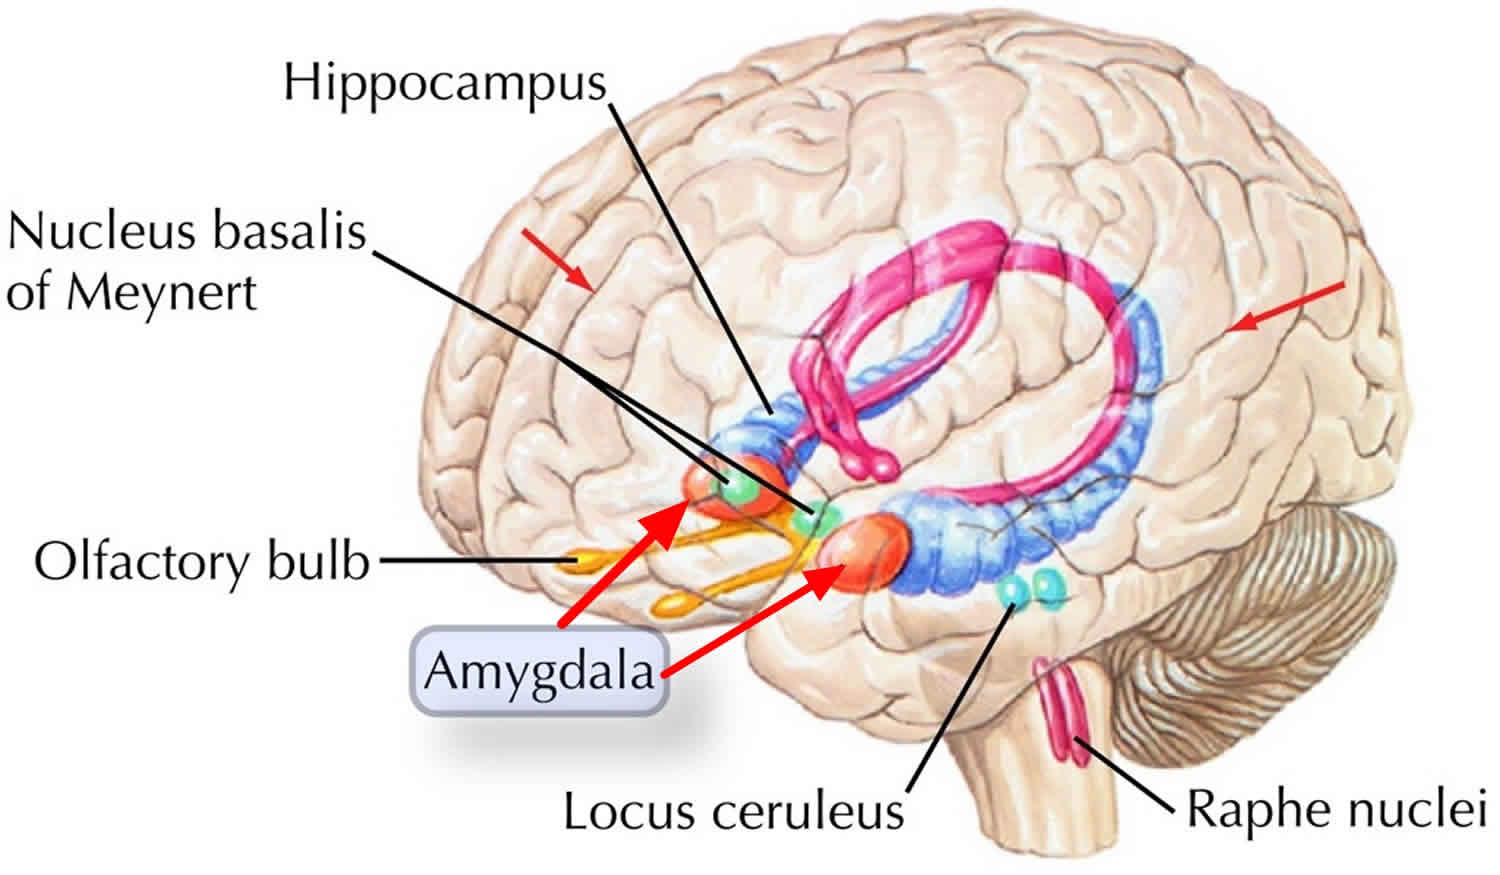 How do you know if your amygdala is damaged?